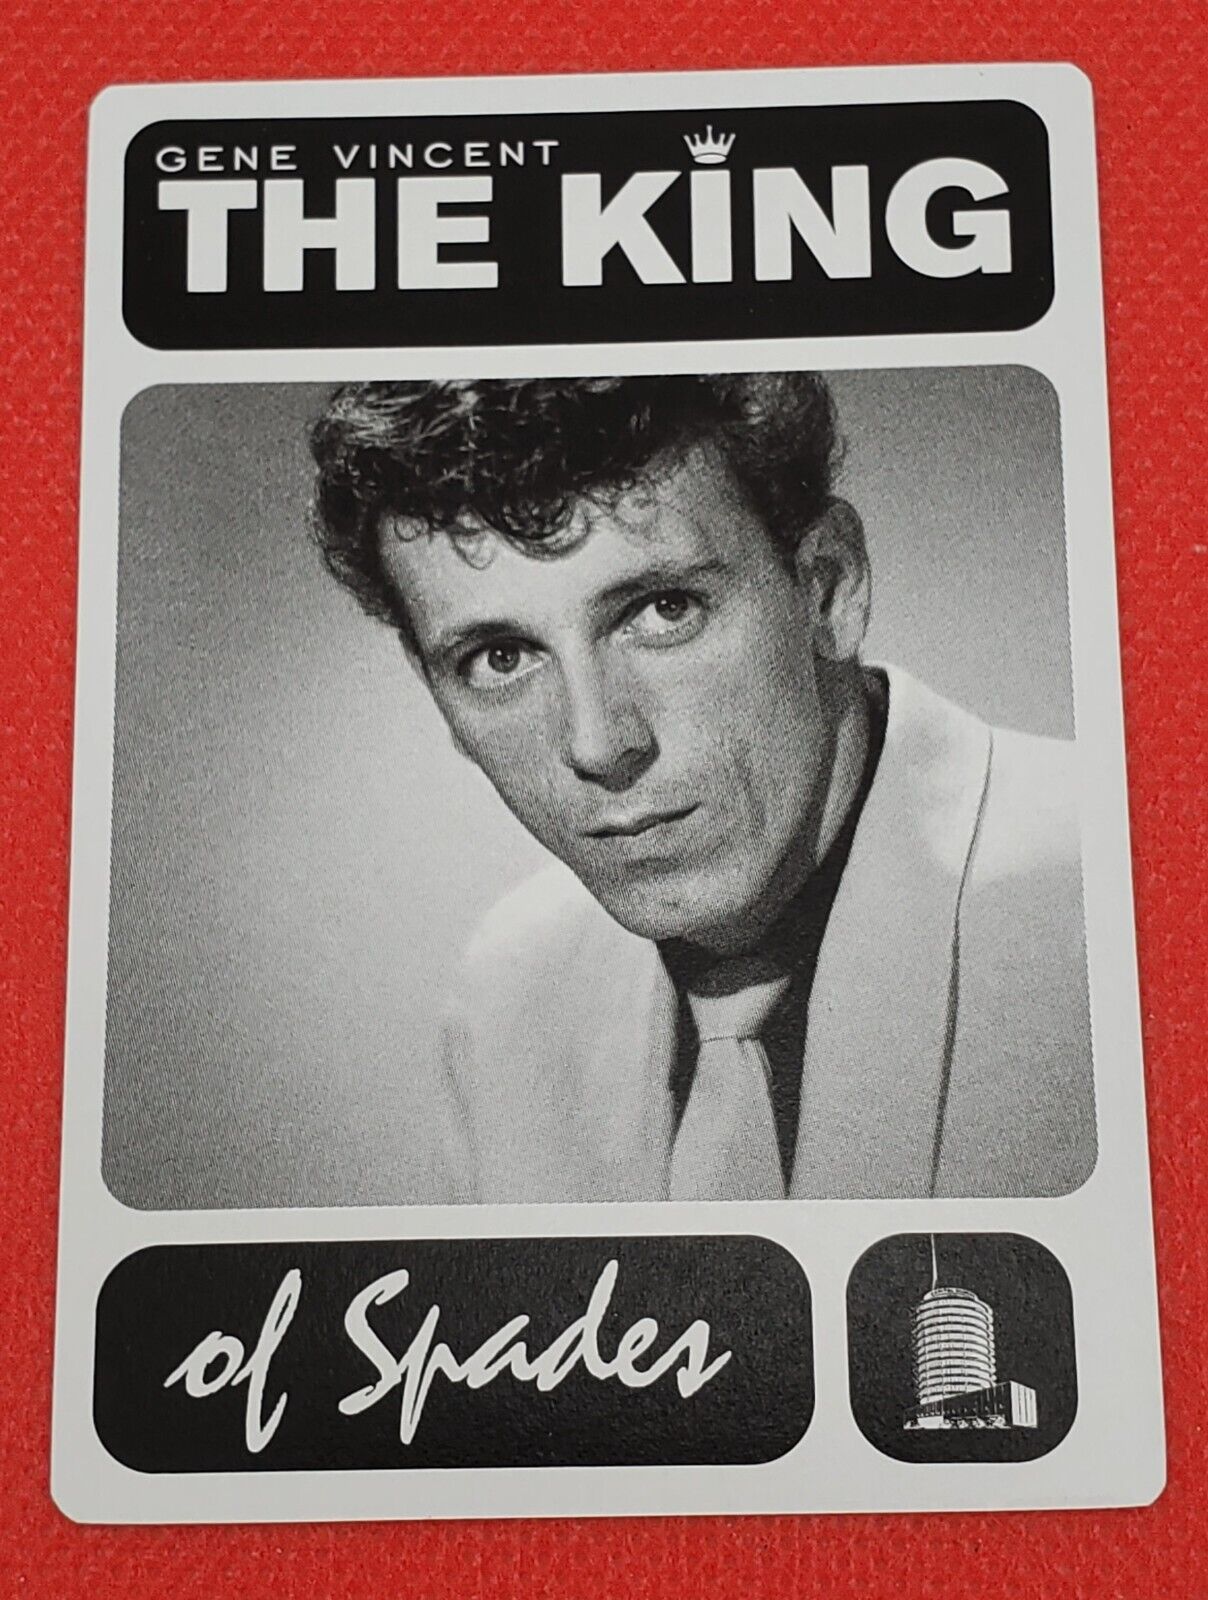 Gene Vincent Rare Capitol Records Music Promotional Playing Trading Card